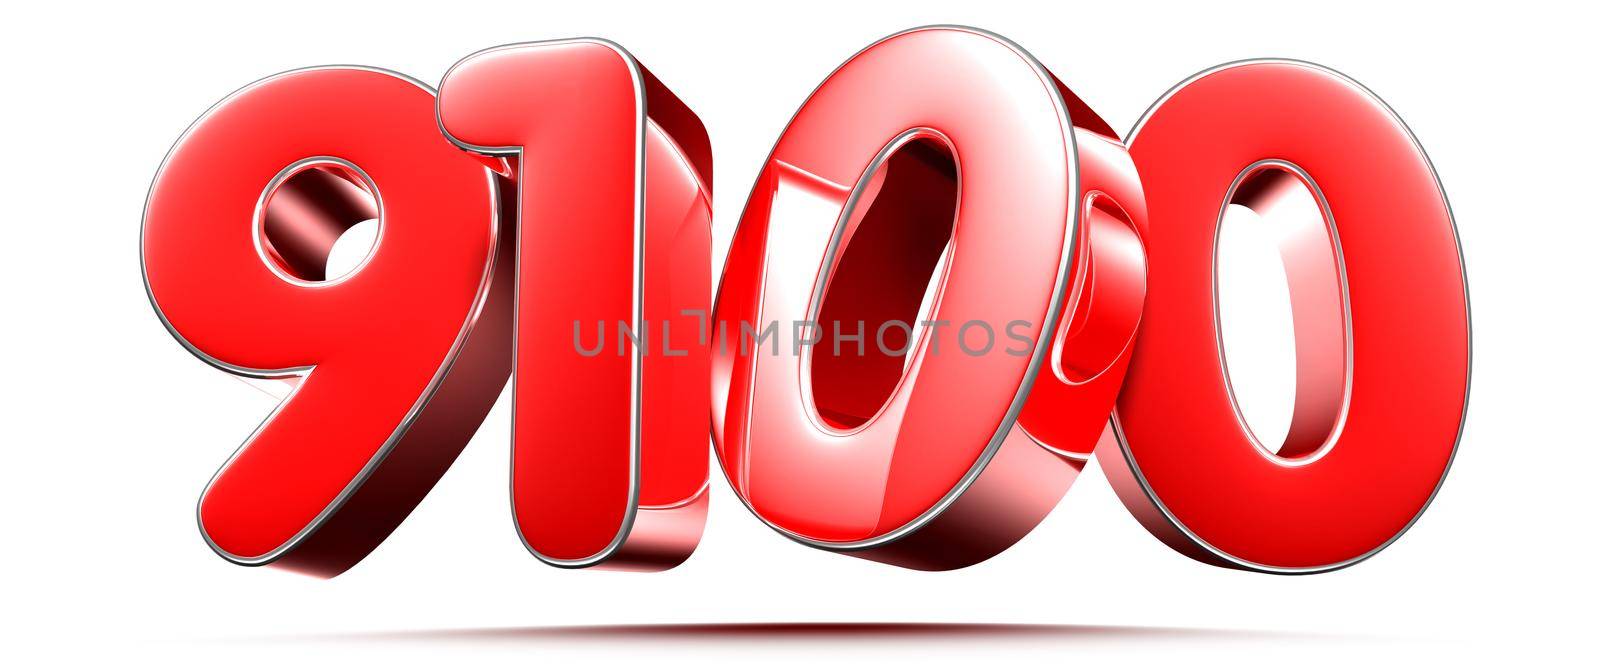 Rounded red numbers 9100 on white background 3D illustration with clipping path by thitimontoyai